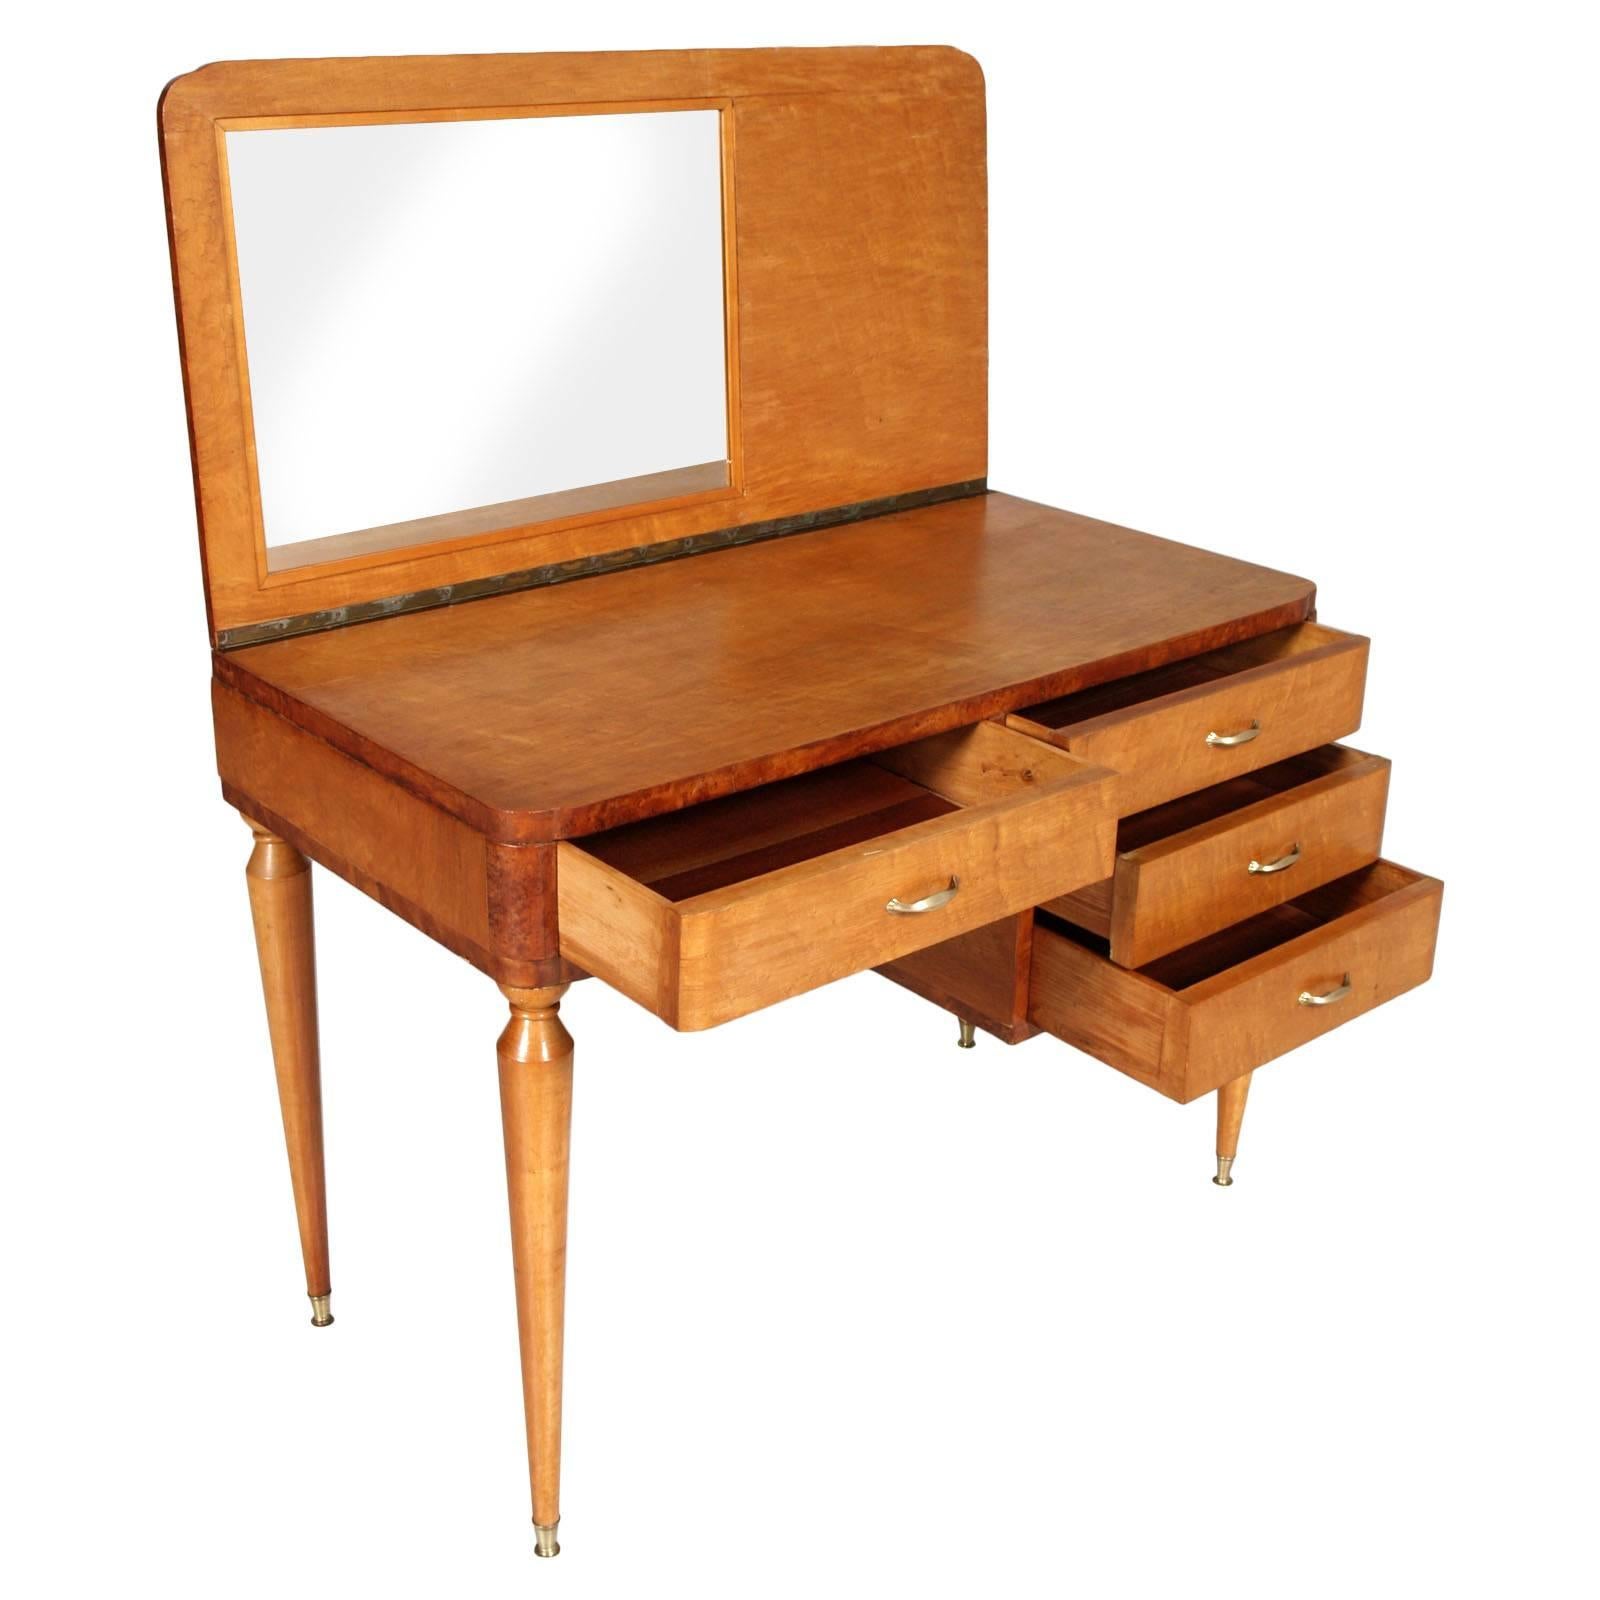 Guglielmo Ulrich manner desk and dressing table;
Desk in walnut, elm and elm burl. Feet in golden brass
A wonderful and very useful desk representative of Mid-Century Italian design

Measures cm: H 78, W 100, D 57. 
(Height for chair 60 cm).